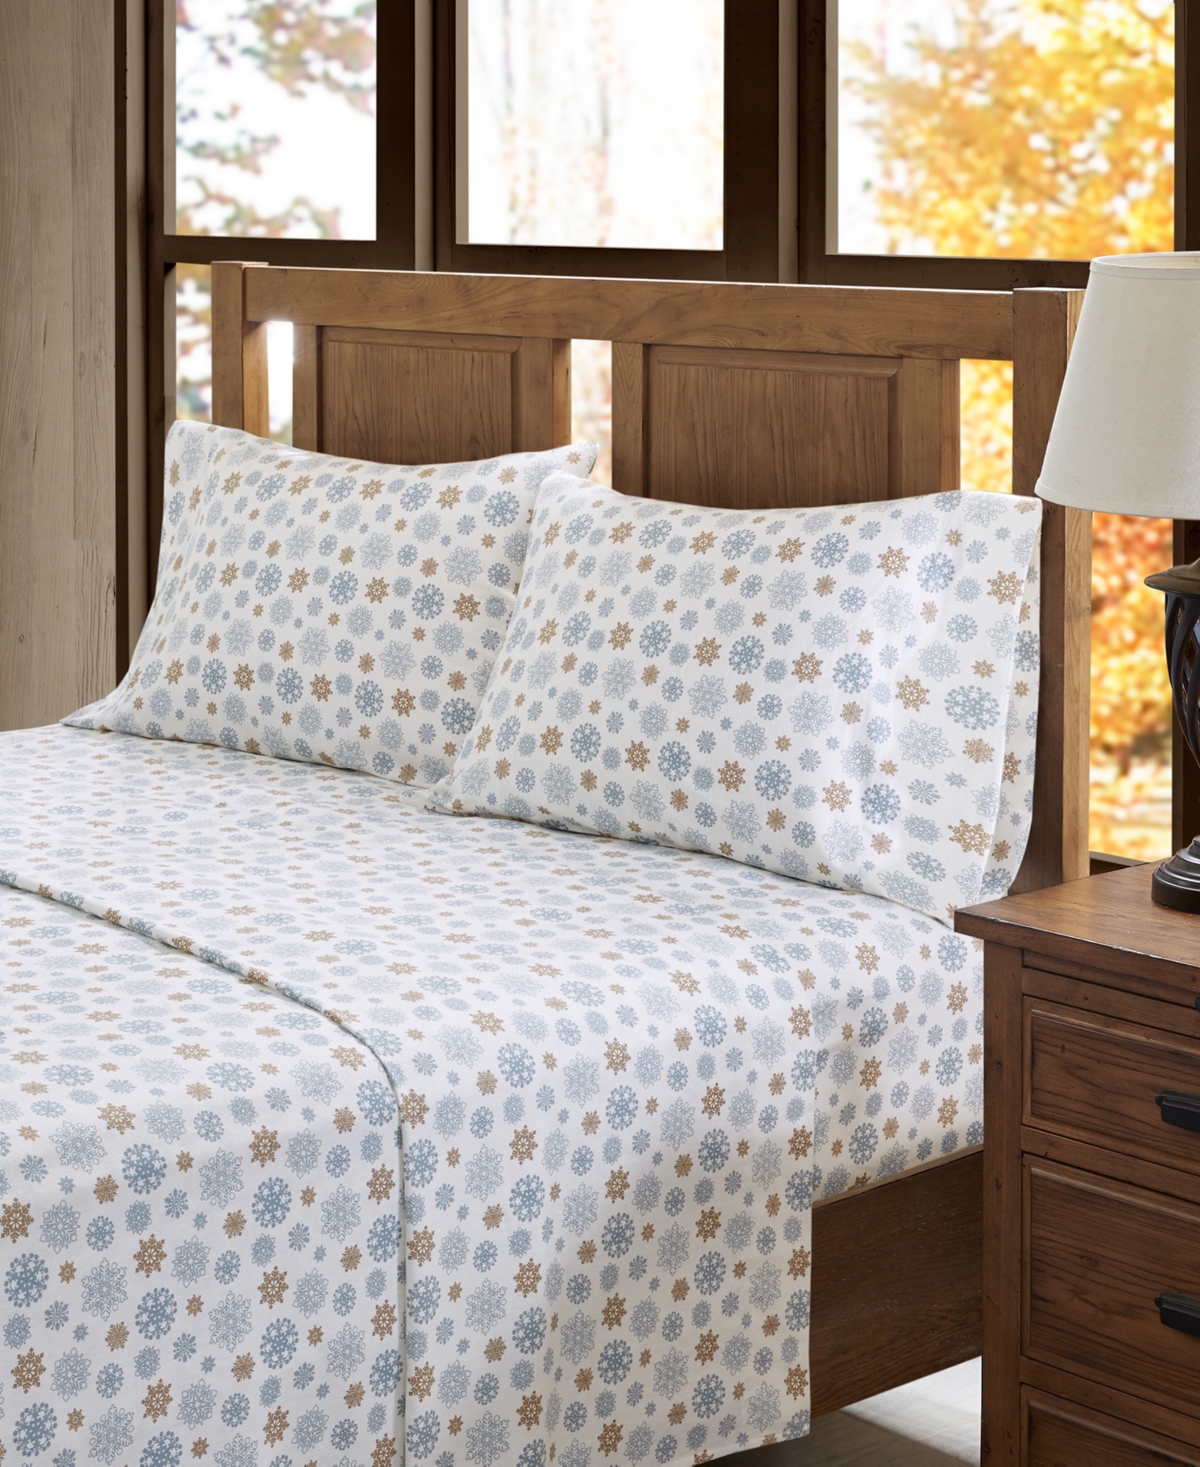 Sleep Philosophy True North By  Novelty Printed Cotton Flannel 4-pc. Sheet Set, King In Tan,blue Snowflakes